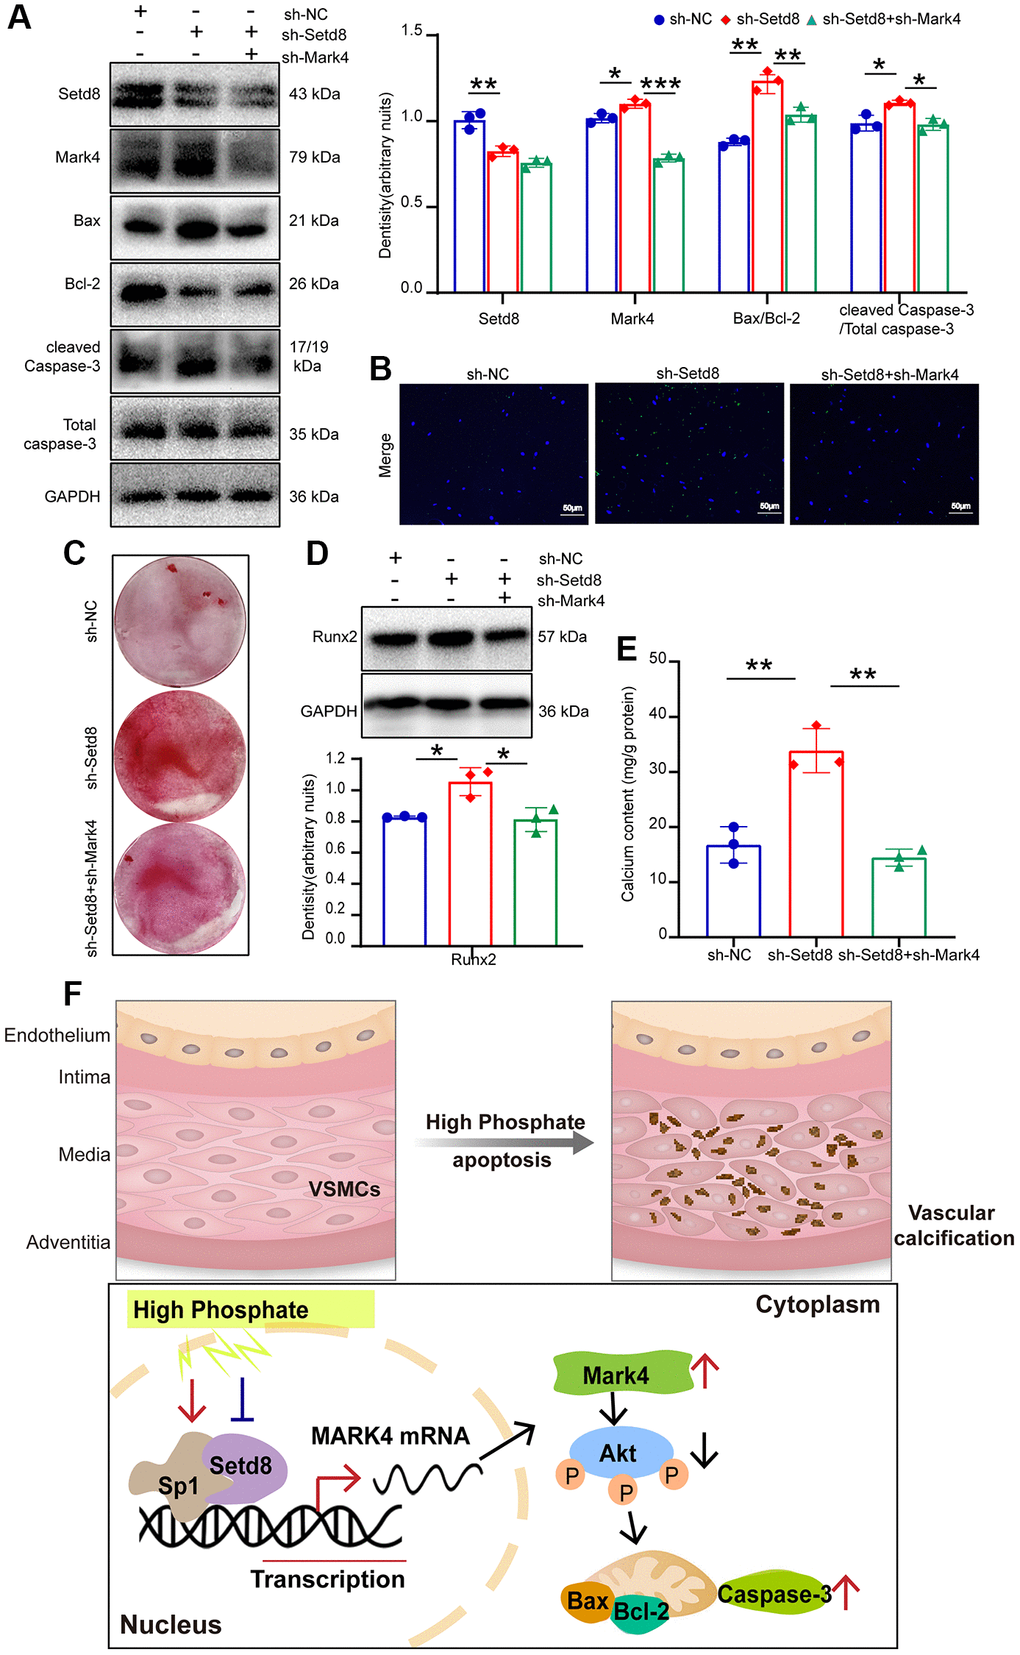 Setd8 negatively regulated VSMCs apoptosis and calcification through augmenting Mark4 expression in VSMCs. VSMCs were infected with lentiviral shRNA Setd8 (sh-Setd8) and shRNA Mark4 (sh-Mark4) or its negative control (sh-NC) in normal medium for 72 h. (A) Western blot analysis of Setd8, Mark4 and apoptosis-related proteins in VSMCs with sh-Setd8 and sh-Mark4. (B) Apoptosis of VSMCs with sh-Setd8 and sh-Mark4 was assessed by TUNEL staining. (C) Alizarin Red S staining in VSMCs infected with sh-Setd8 and sh-Mark4. (D) Western blot and quantitative densitometry analysis of Runx2. (E) Calcium content assessed calcification in VSMCs with sh-Setd8 and sh-Mark4. *Means p **p ***p *p **p ***p F) Schematic representation of the working model.